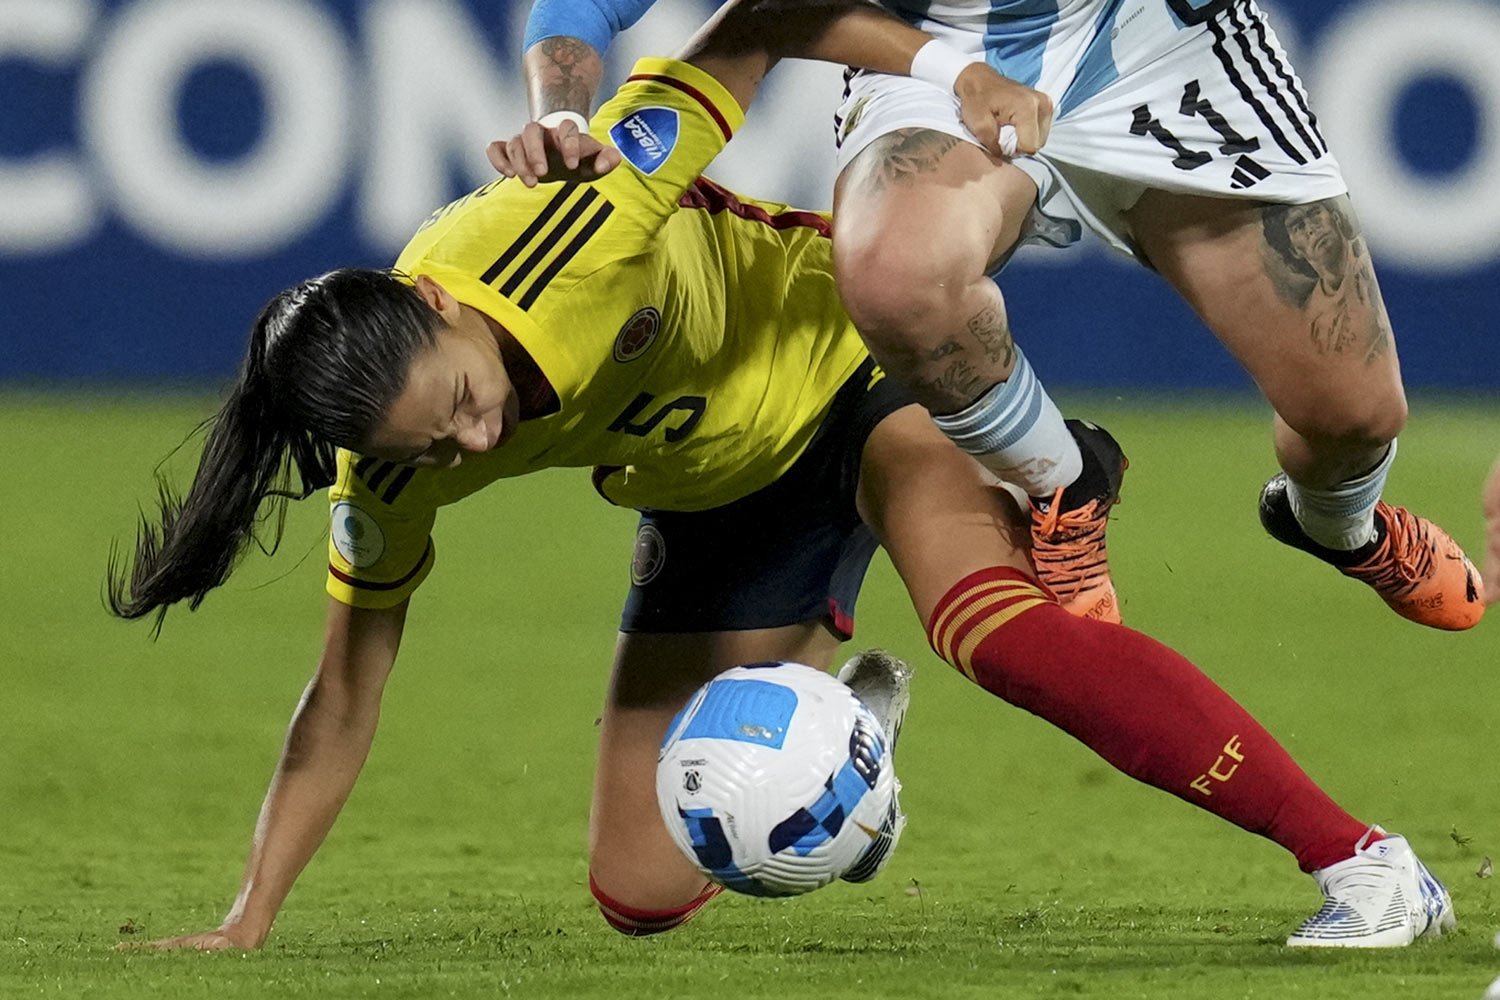  Colombia's Lorena Bedoya, left, and Argentina's Yamila Rodriguez battle for the ball during a Women's Copa America semi final soccer match in Bucaramanga, Colombia , Monday, July 25, 2022. (AP Photo/Dolores Ochoa) 